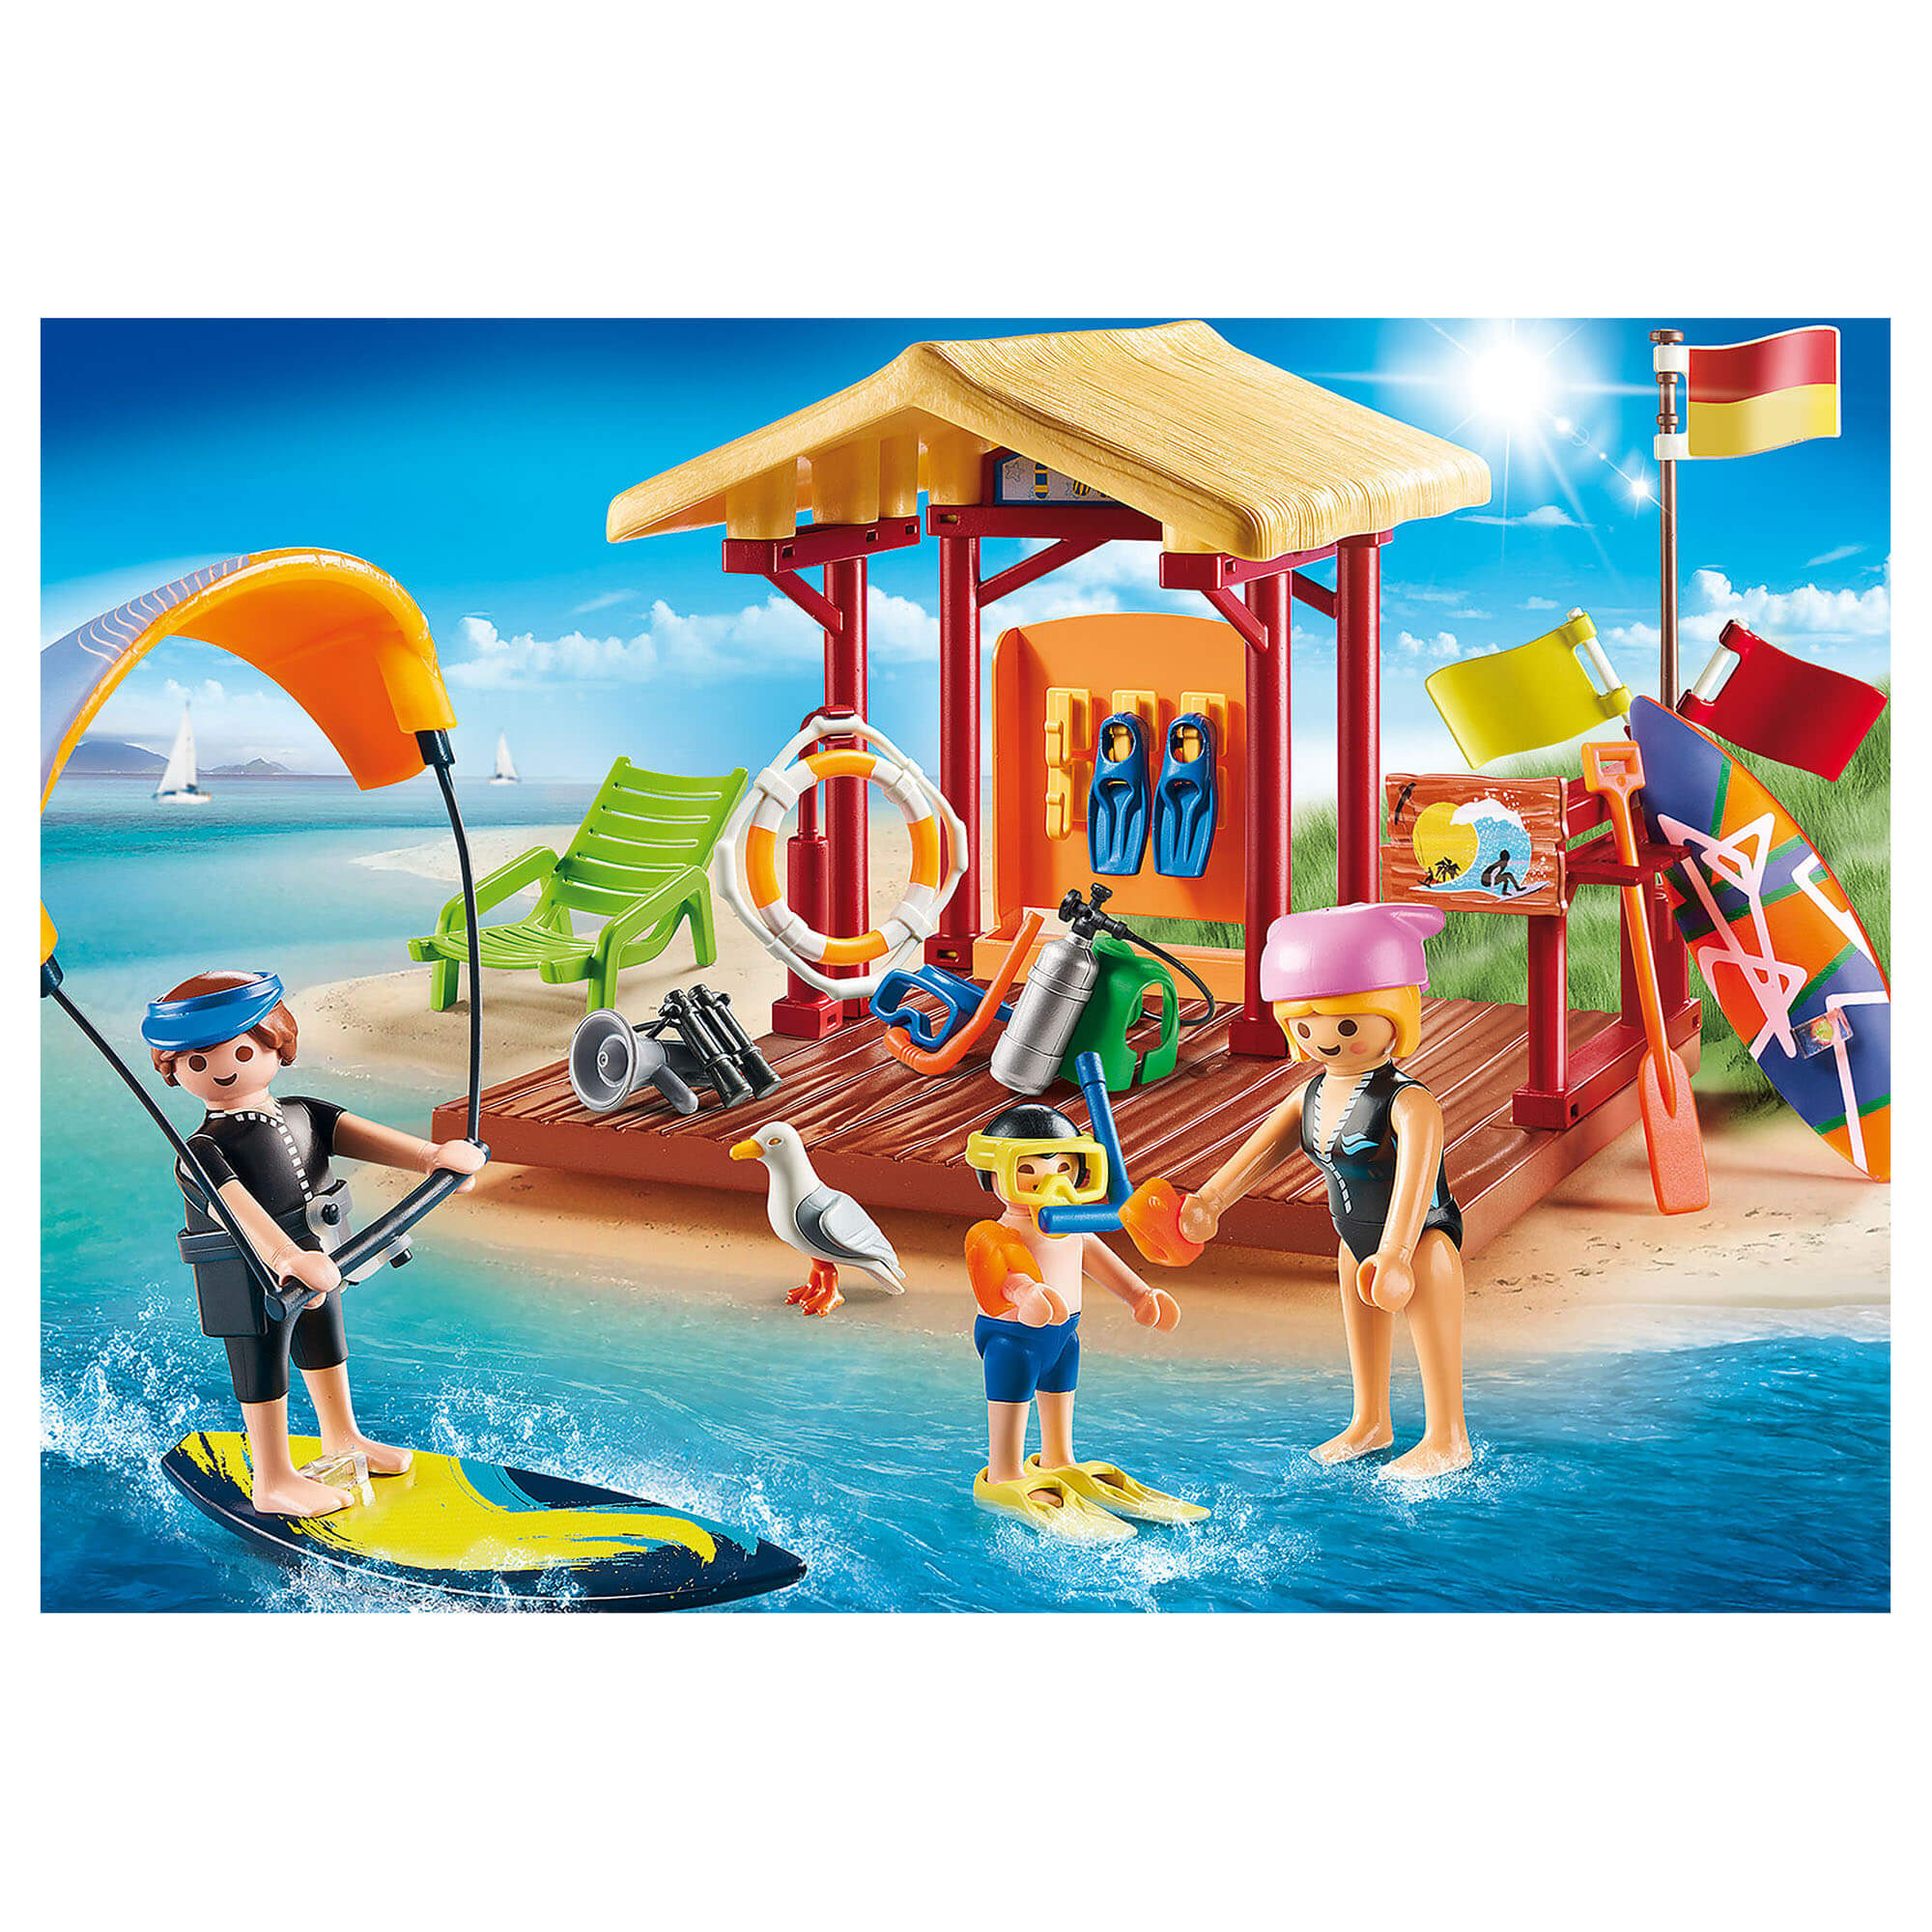 PLAYMOBIL Camping Water Sports Lesson (70090)